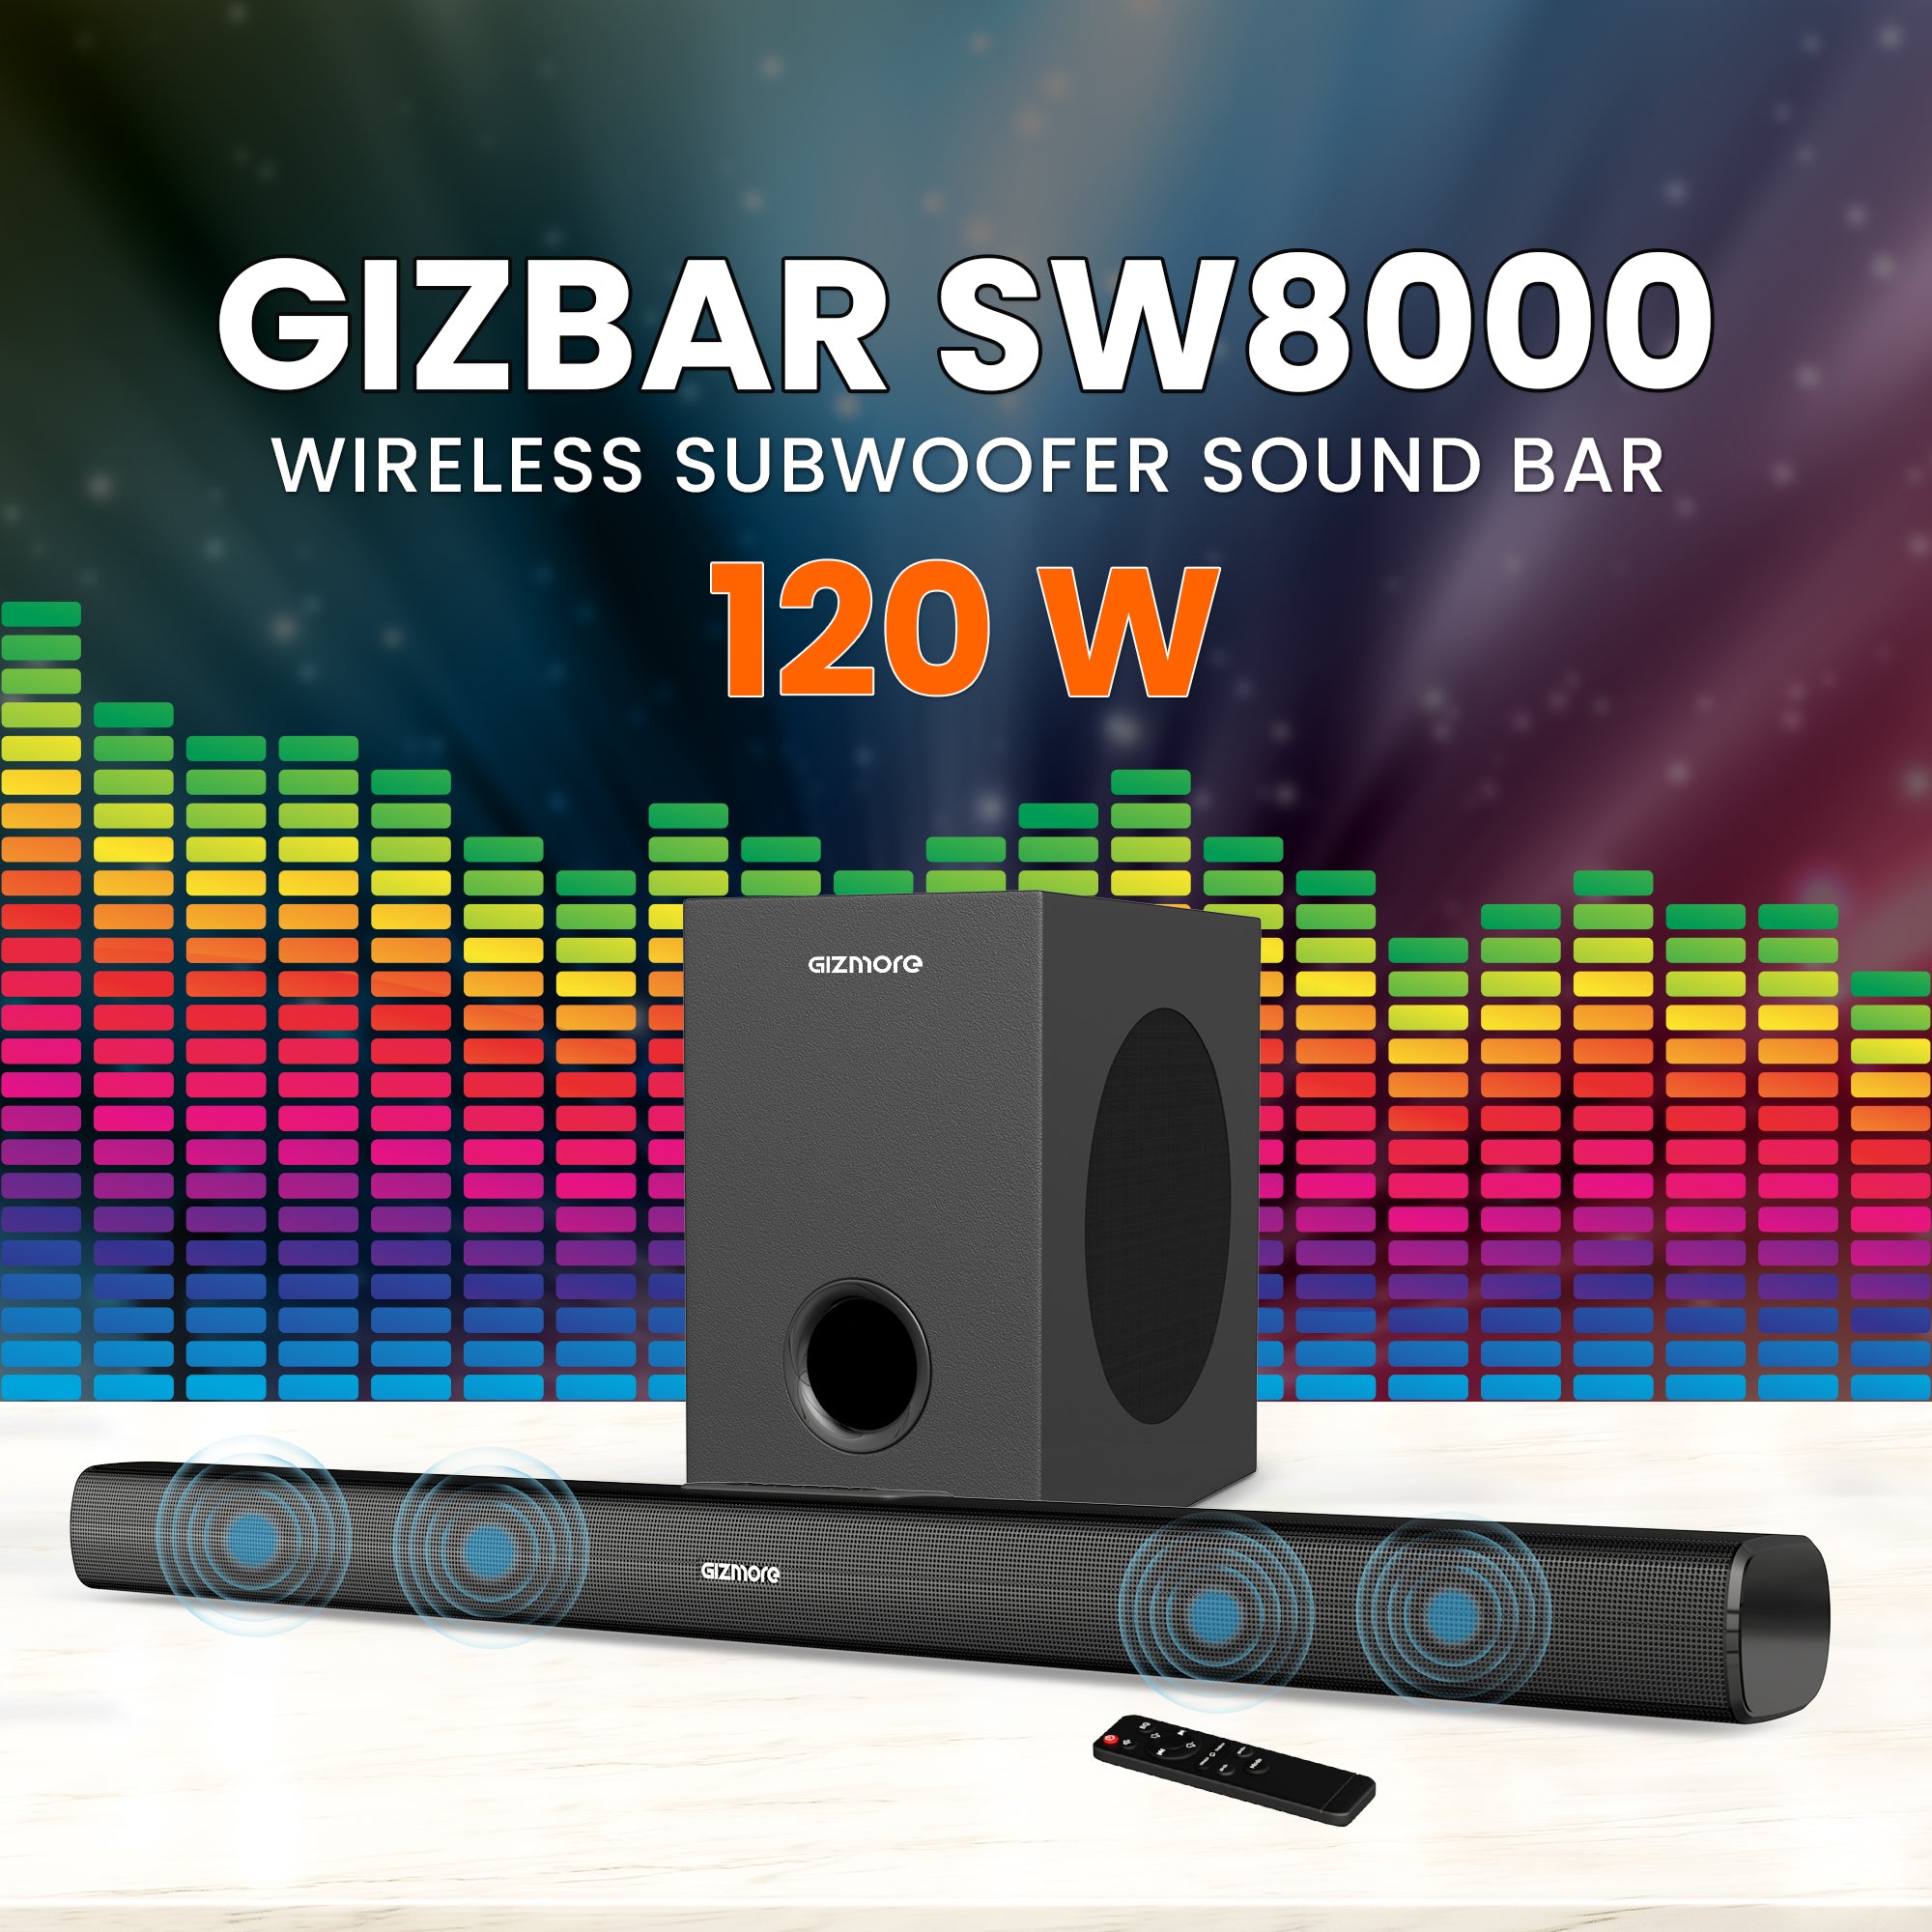 GIZMORE SW8000 120W RMS Wireless Soundbar Speaker with 360 Degree Surround Sound & Extra Deep Bass Subwoofer| Wall Mounted | Multi Connectivity & Remote Control connect with Mobile TV/PC and Projector